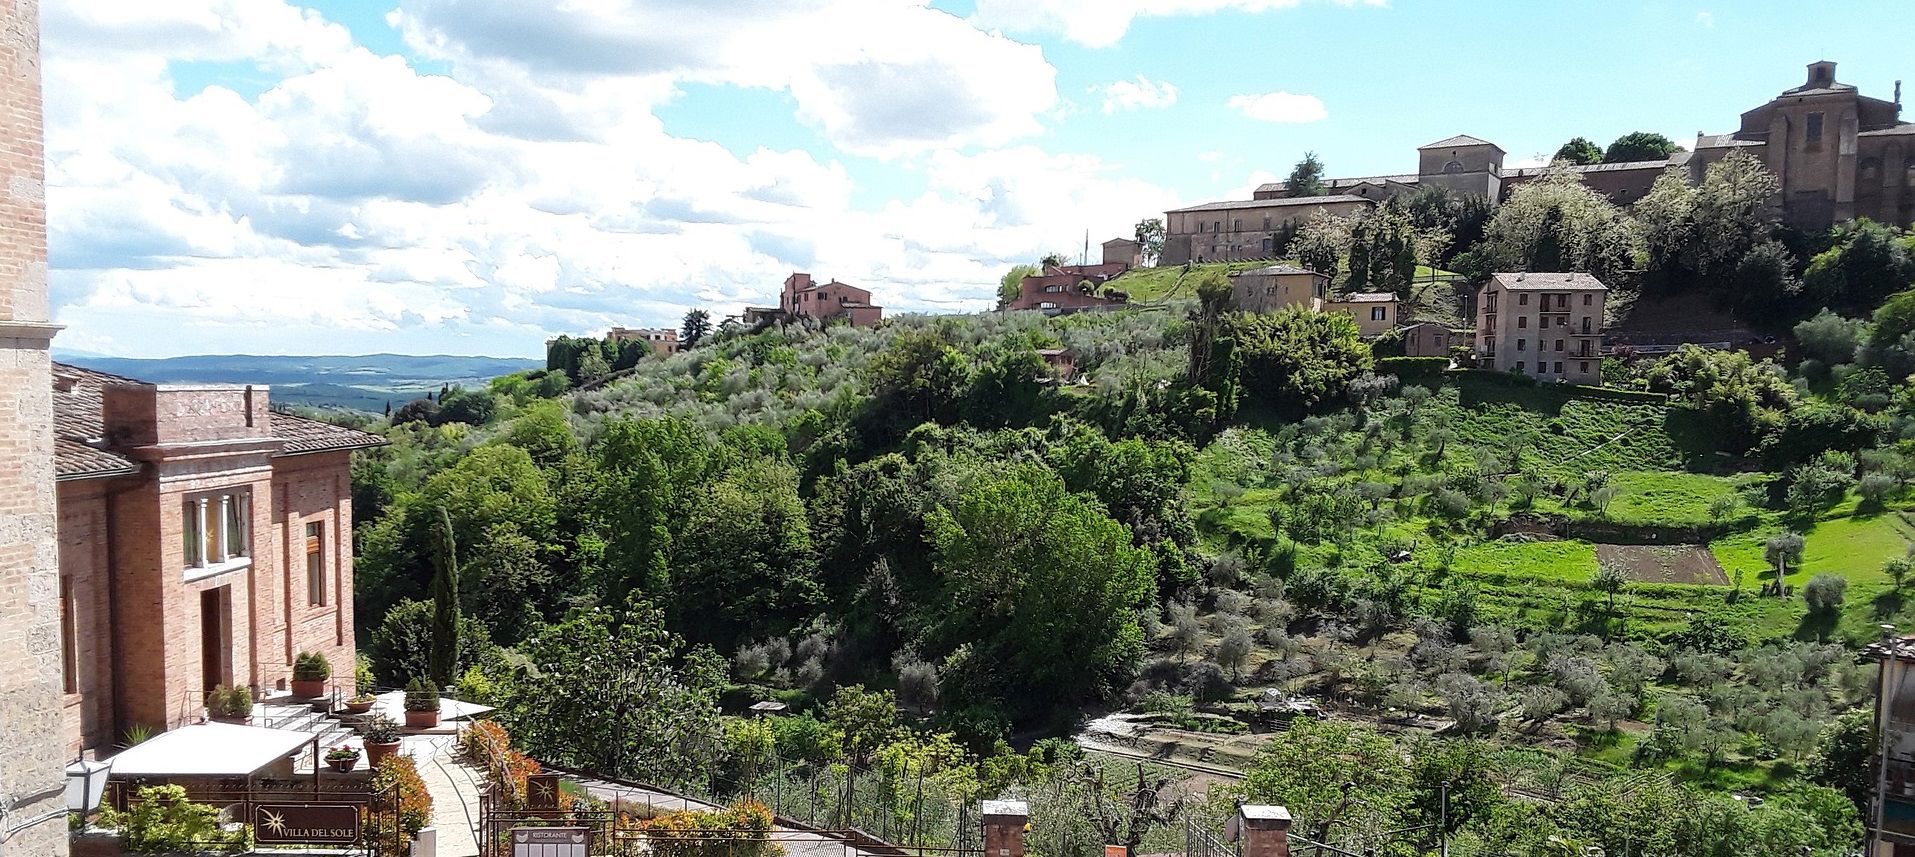 Autumn in the city: the parks and gardens of Siena 2